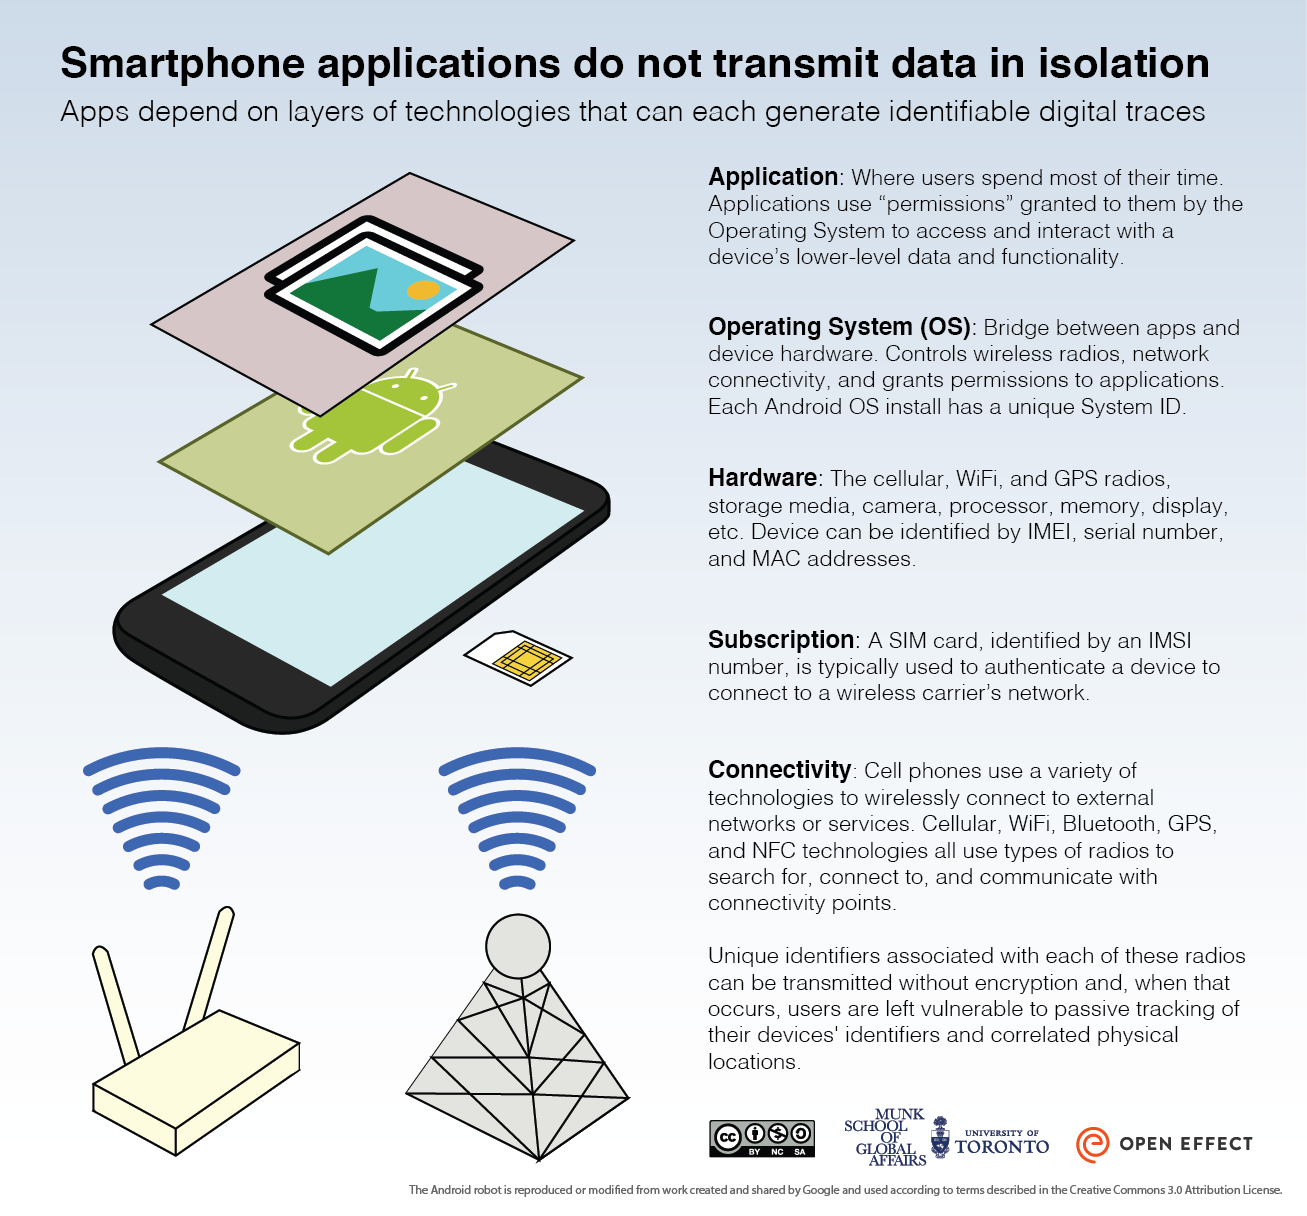 Smartphone applications do not transmit data in isolation